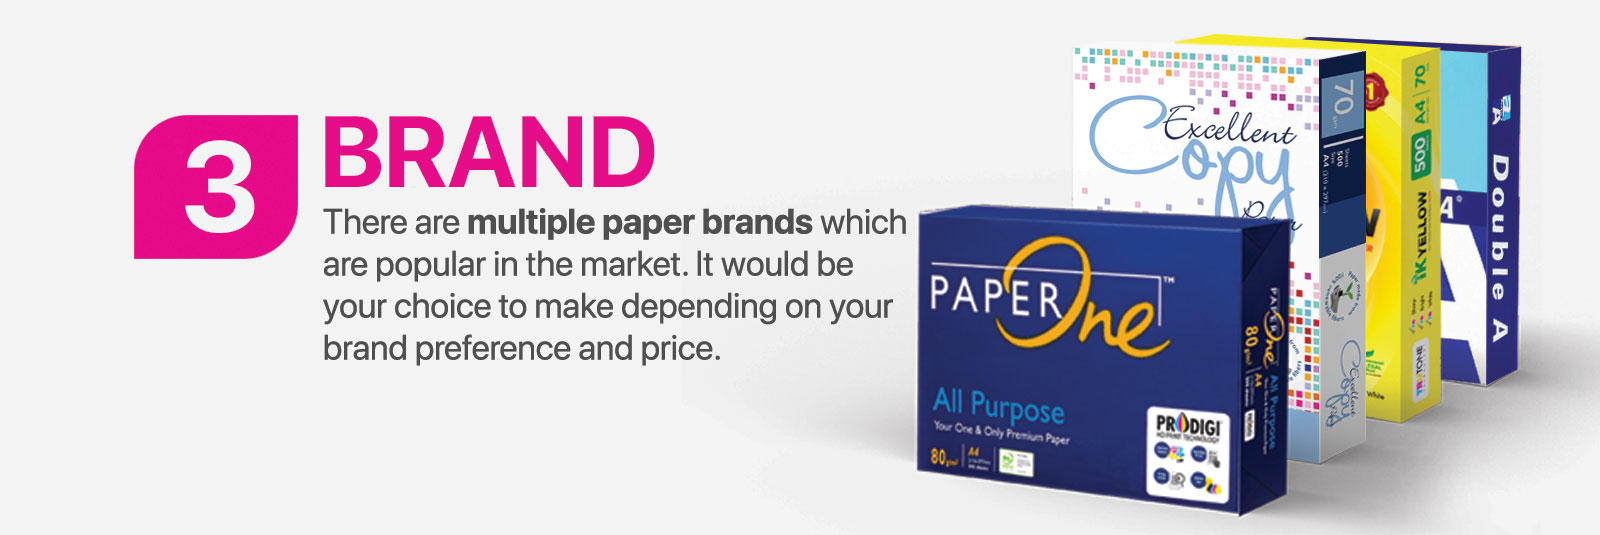 Brand - There are multiple paper brands which are popular in the market. It would be your choice to make depending on your brand preference and price.